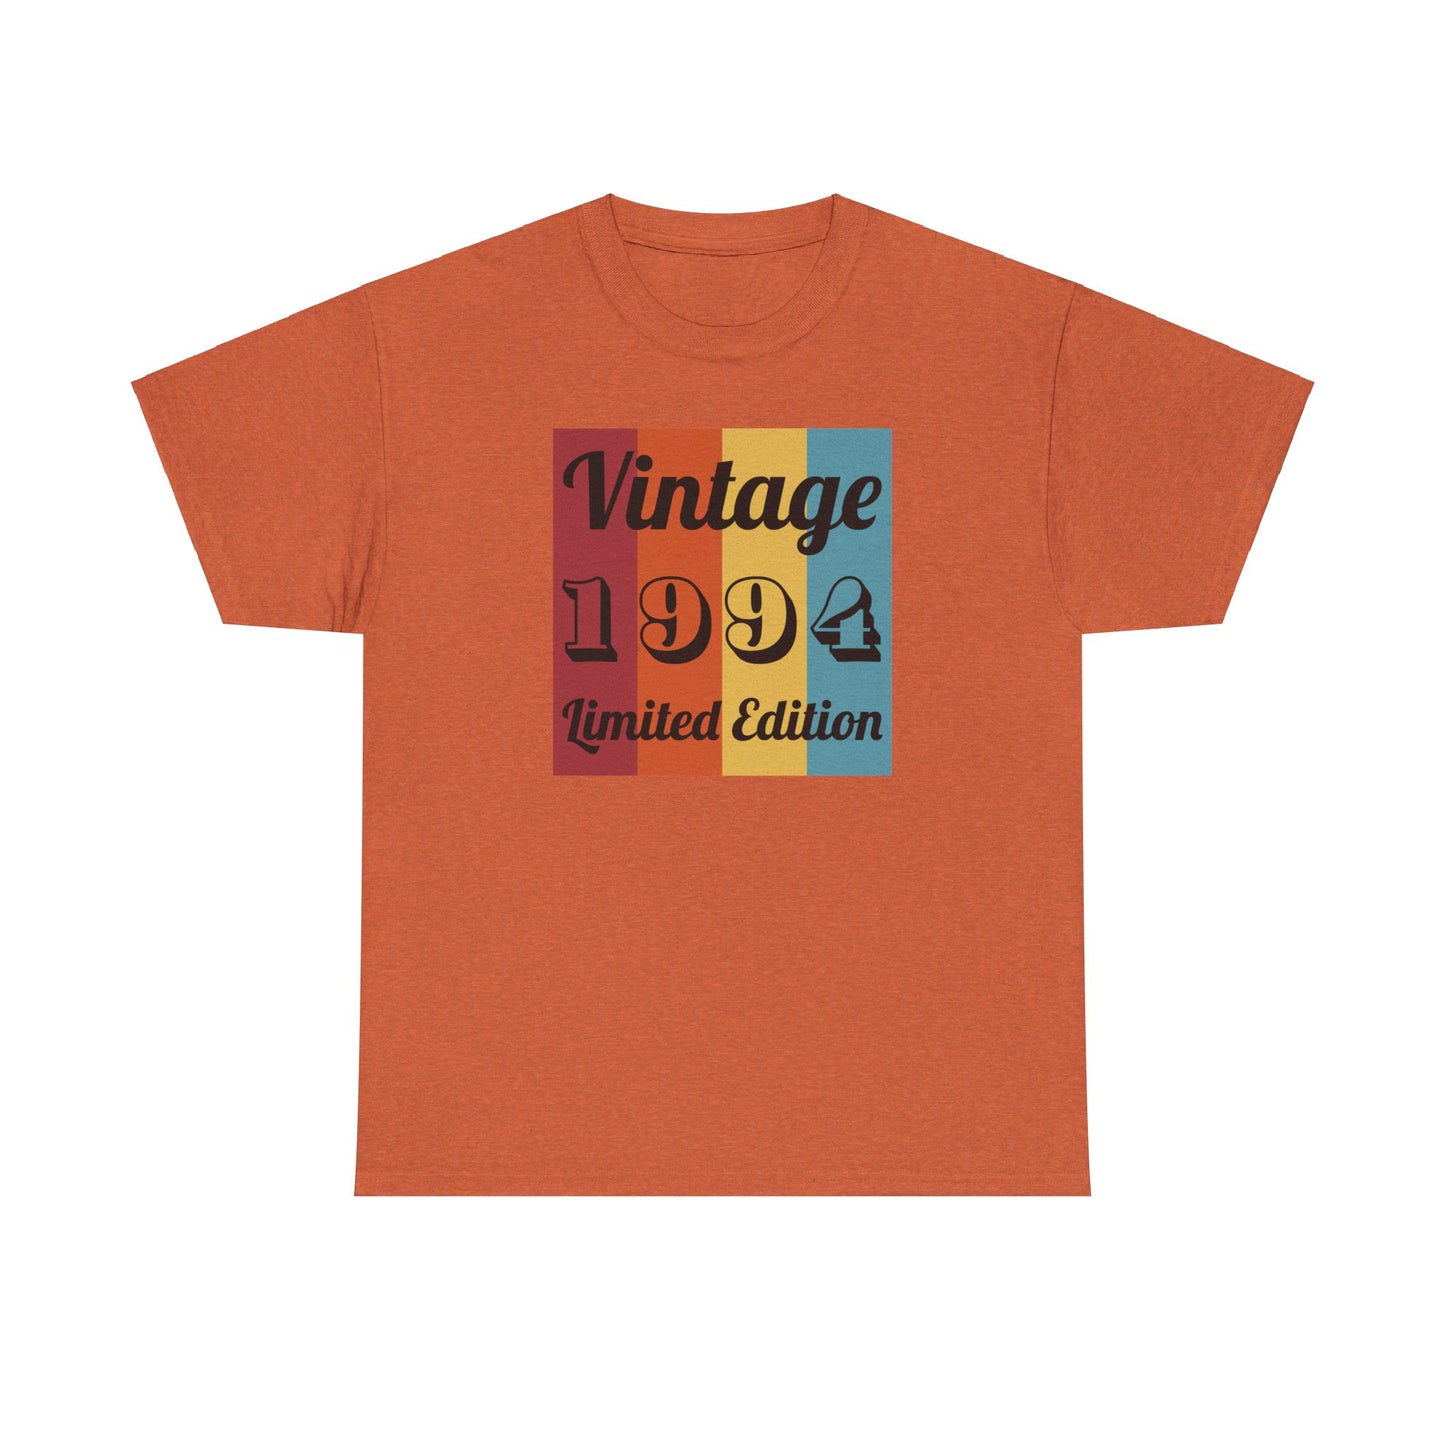 1994 T-Shirt For Vintage Limited Edition TShirt For Class Reunion Shirt For Birthday T Shirt For Birth Year Shirt For Graduation Year Shirt